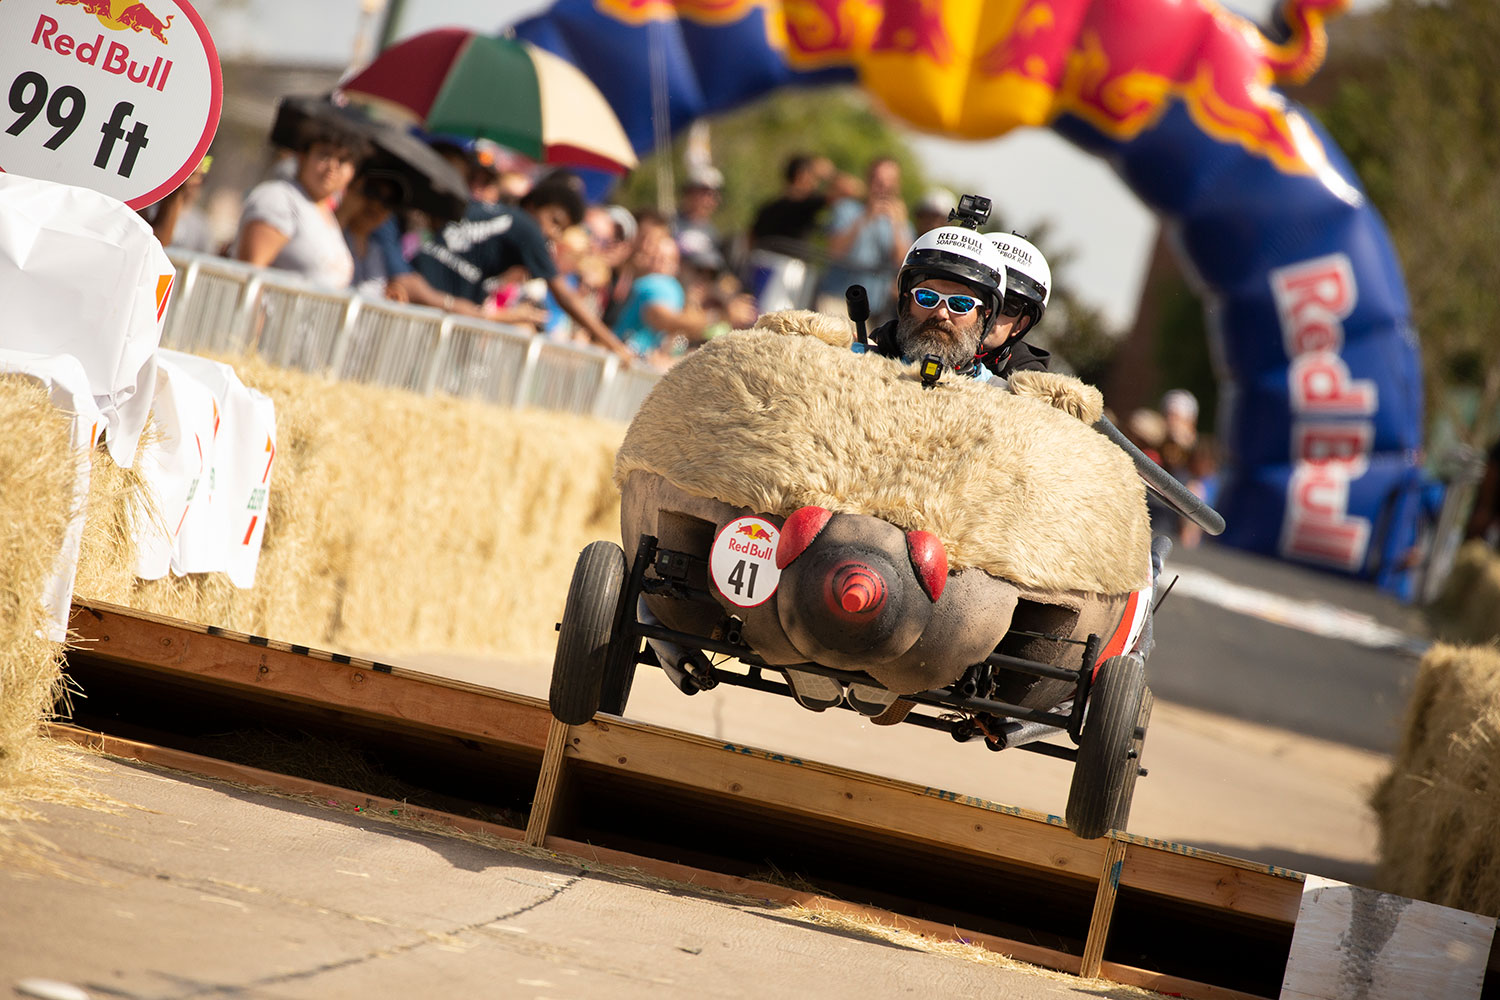 Team Skeeter Done at the Red Bull Soapbox Race // photos courtesy Red Bull